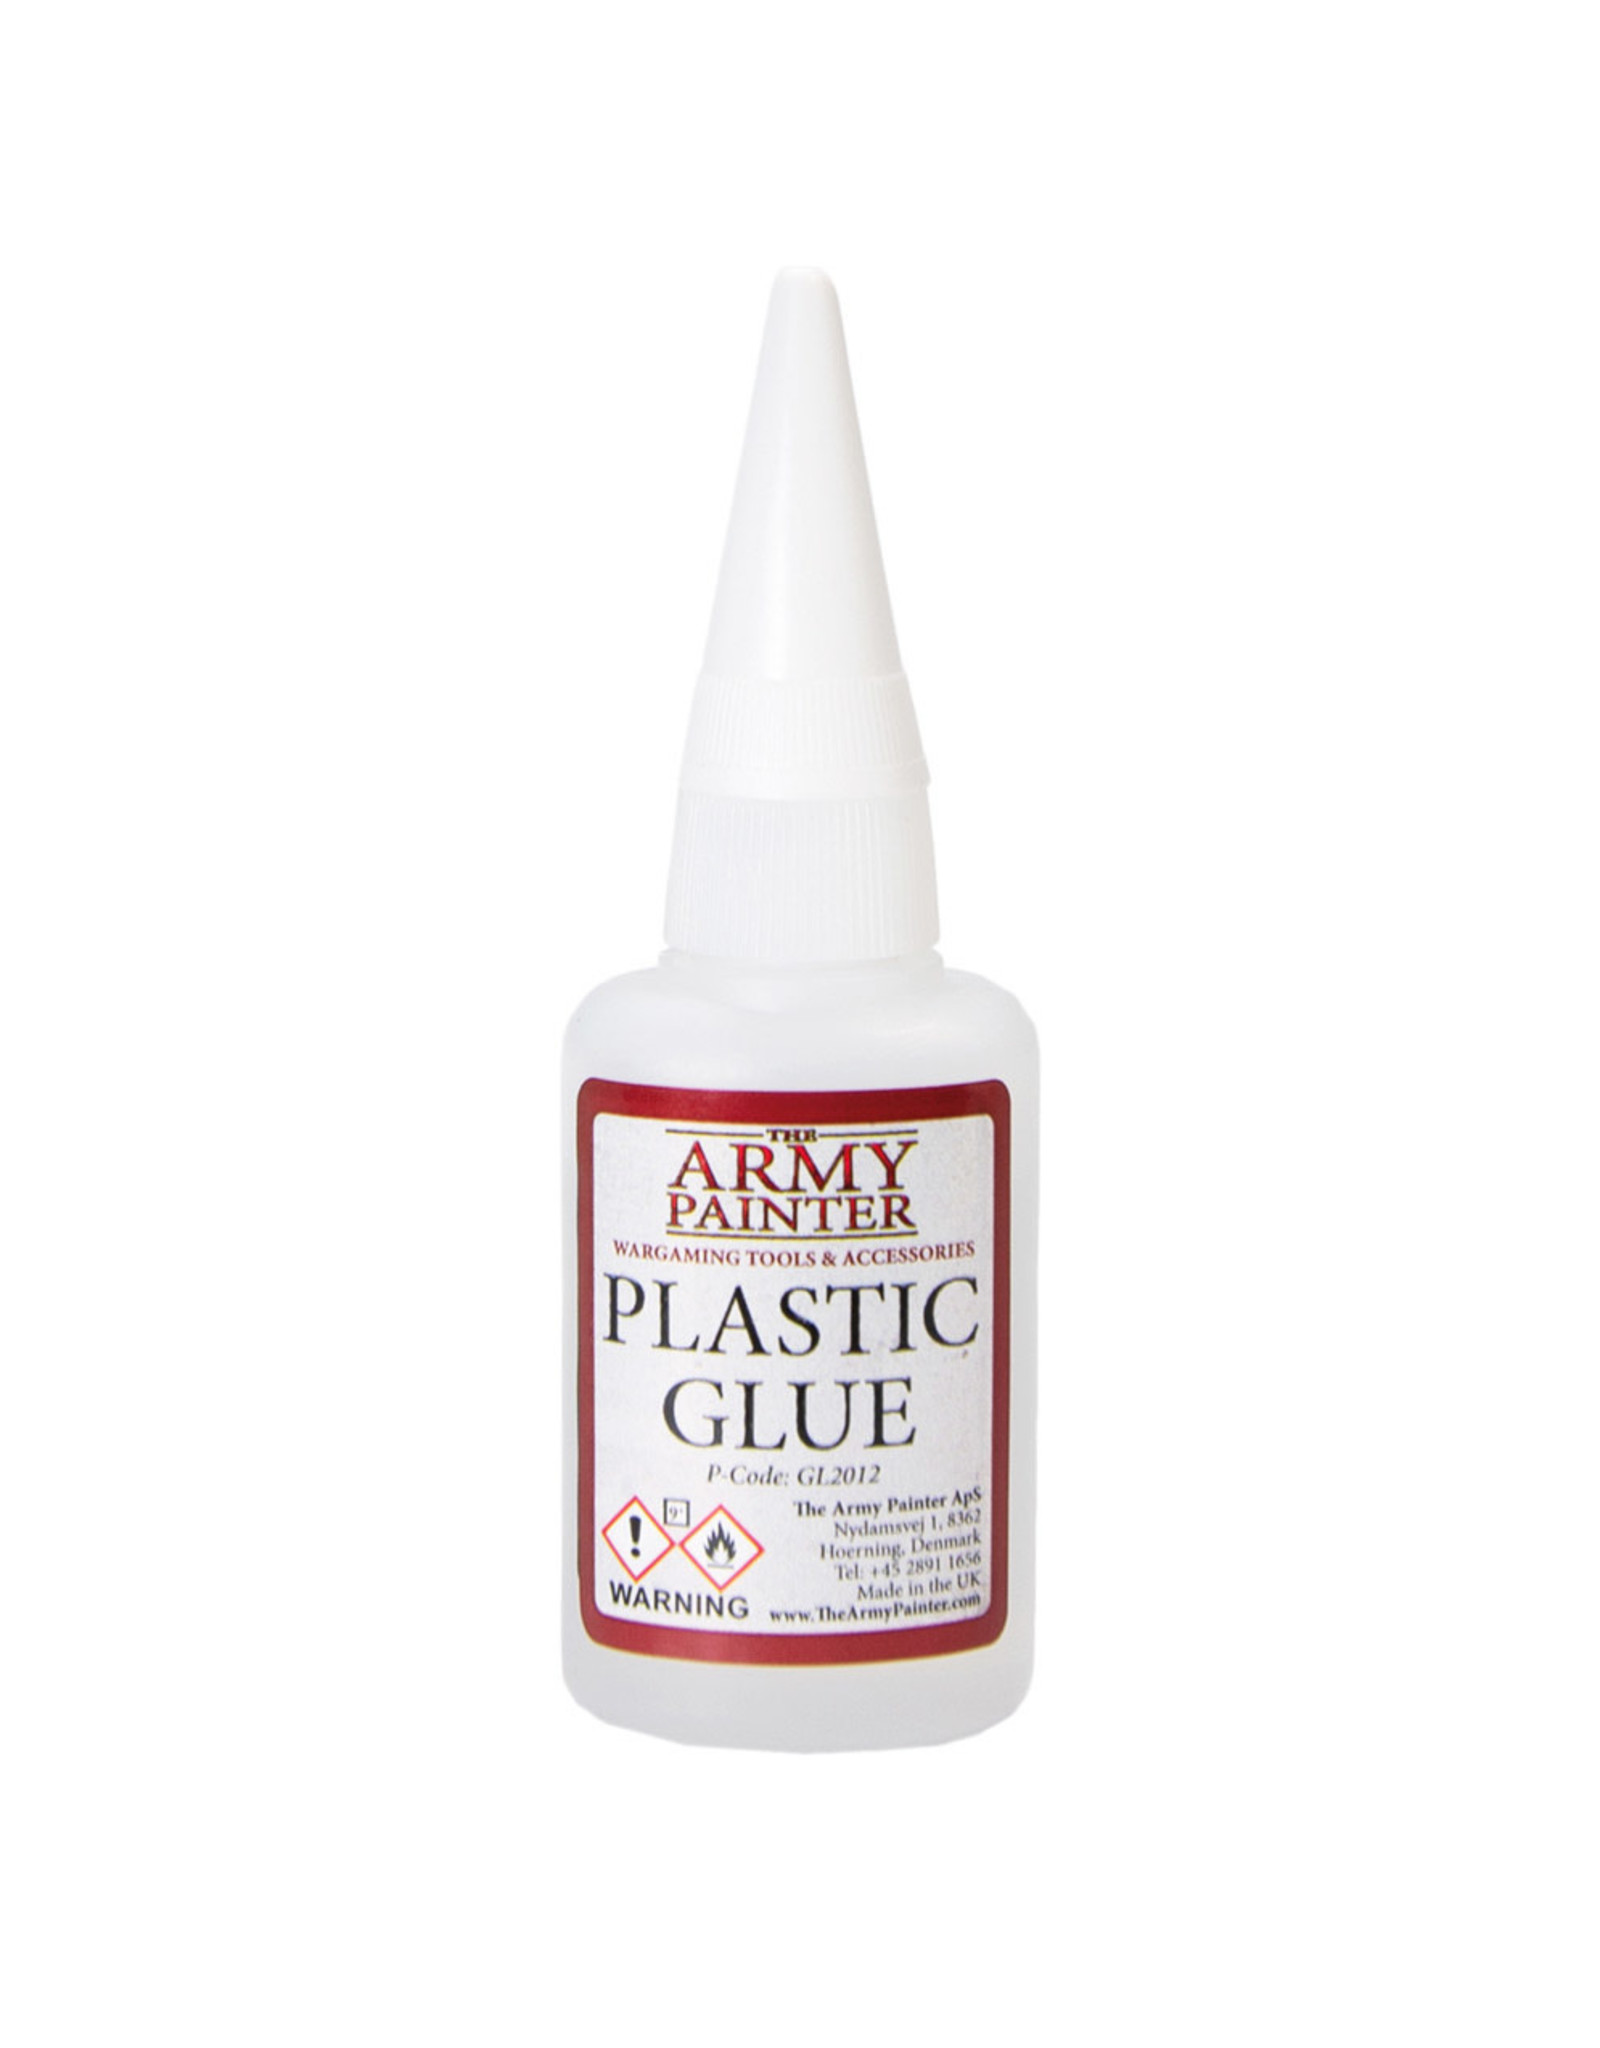 The Army Painter GL2012 Plastic Glue